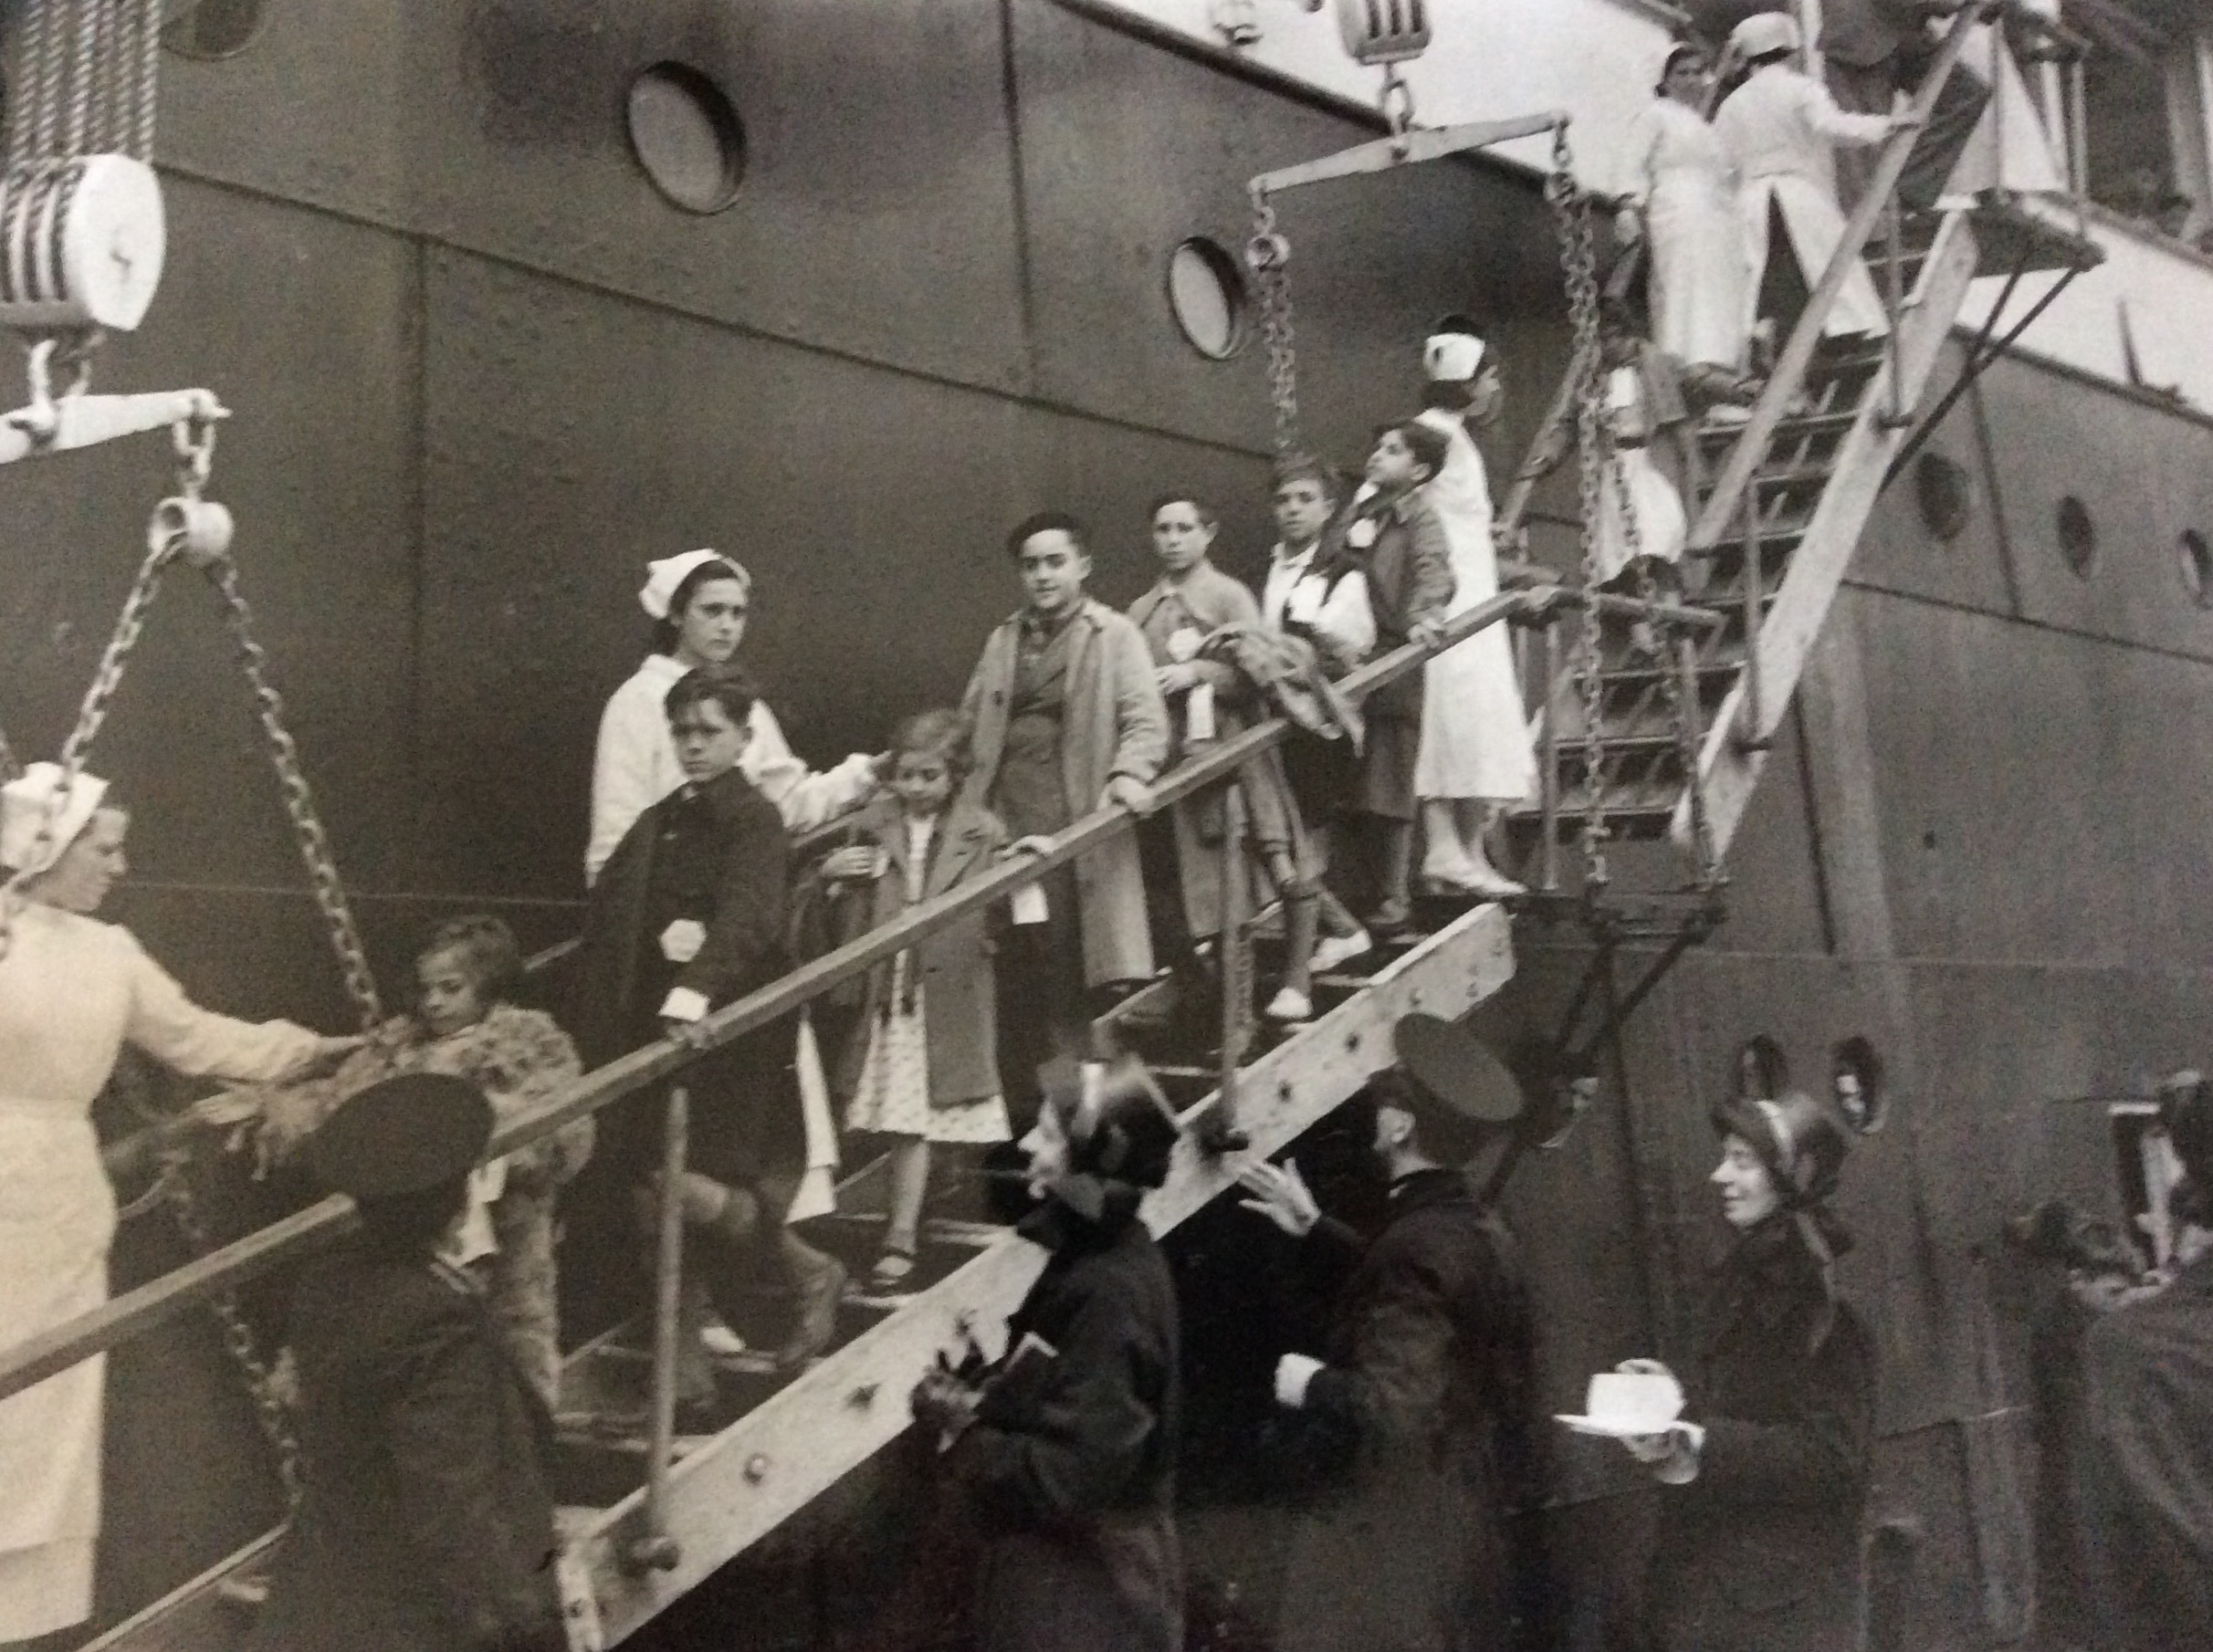 Refugees disembarking SS Habana in 1937 in the UK.